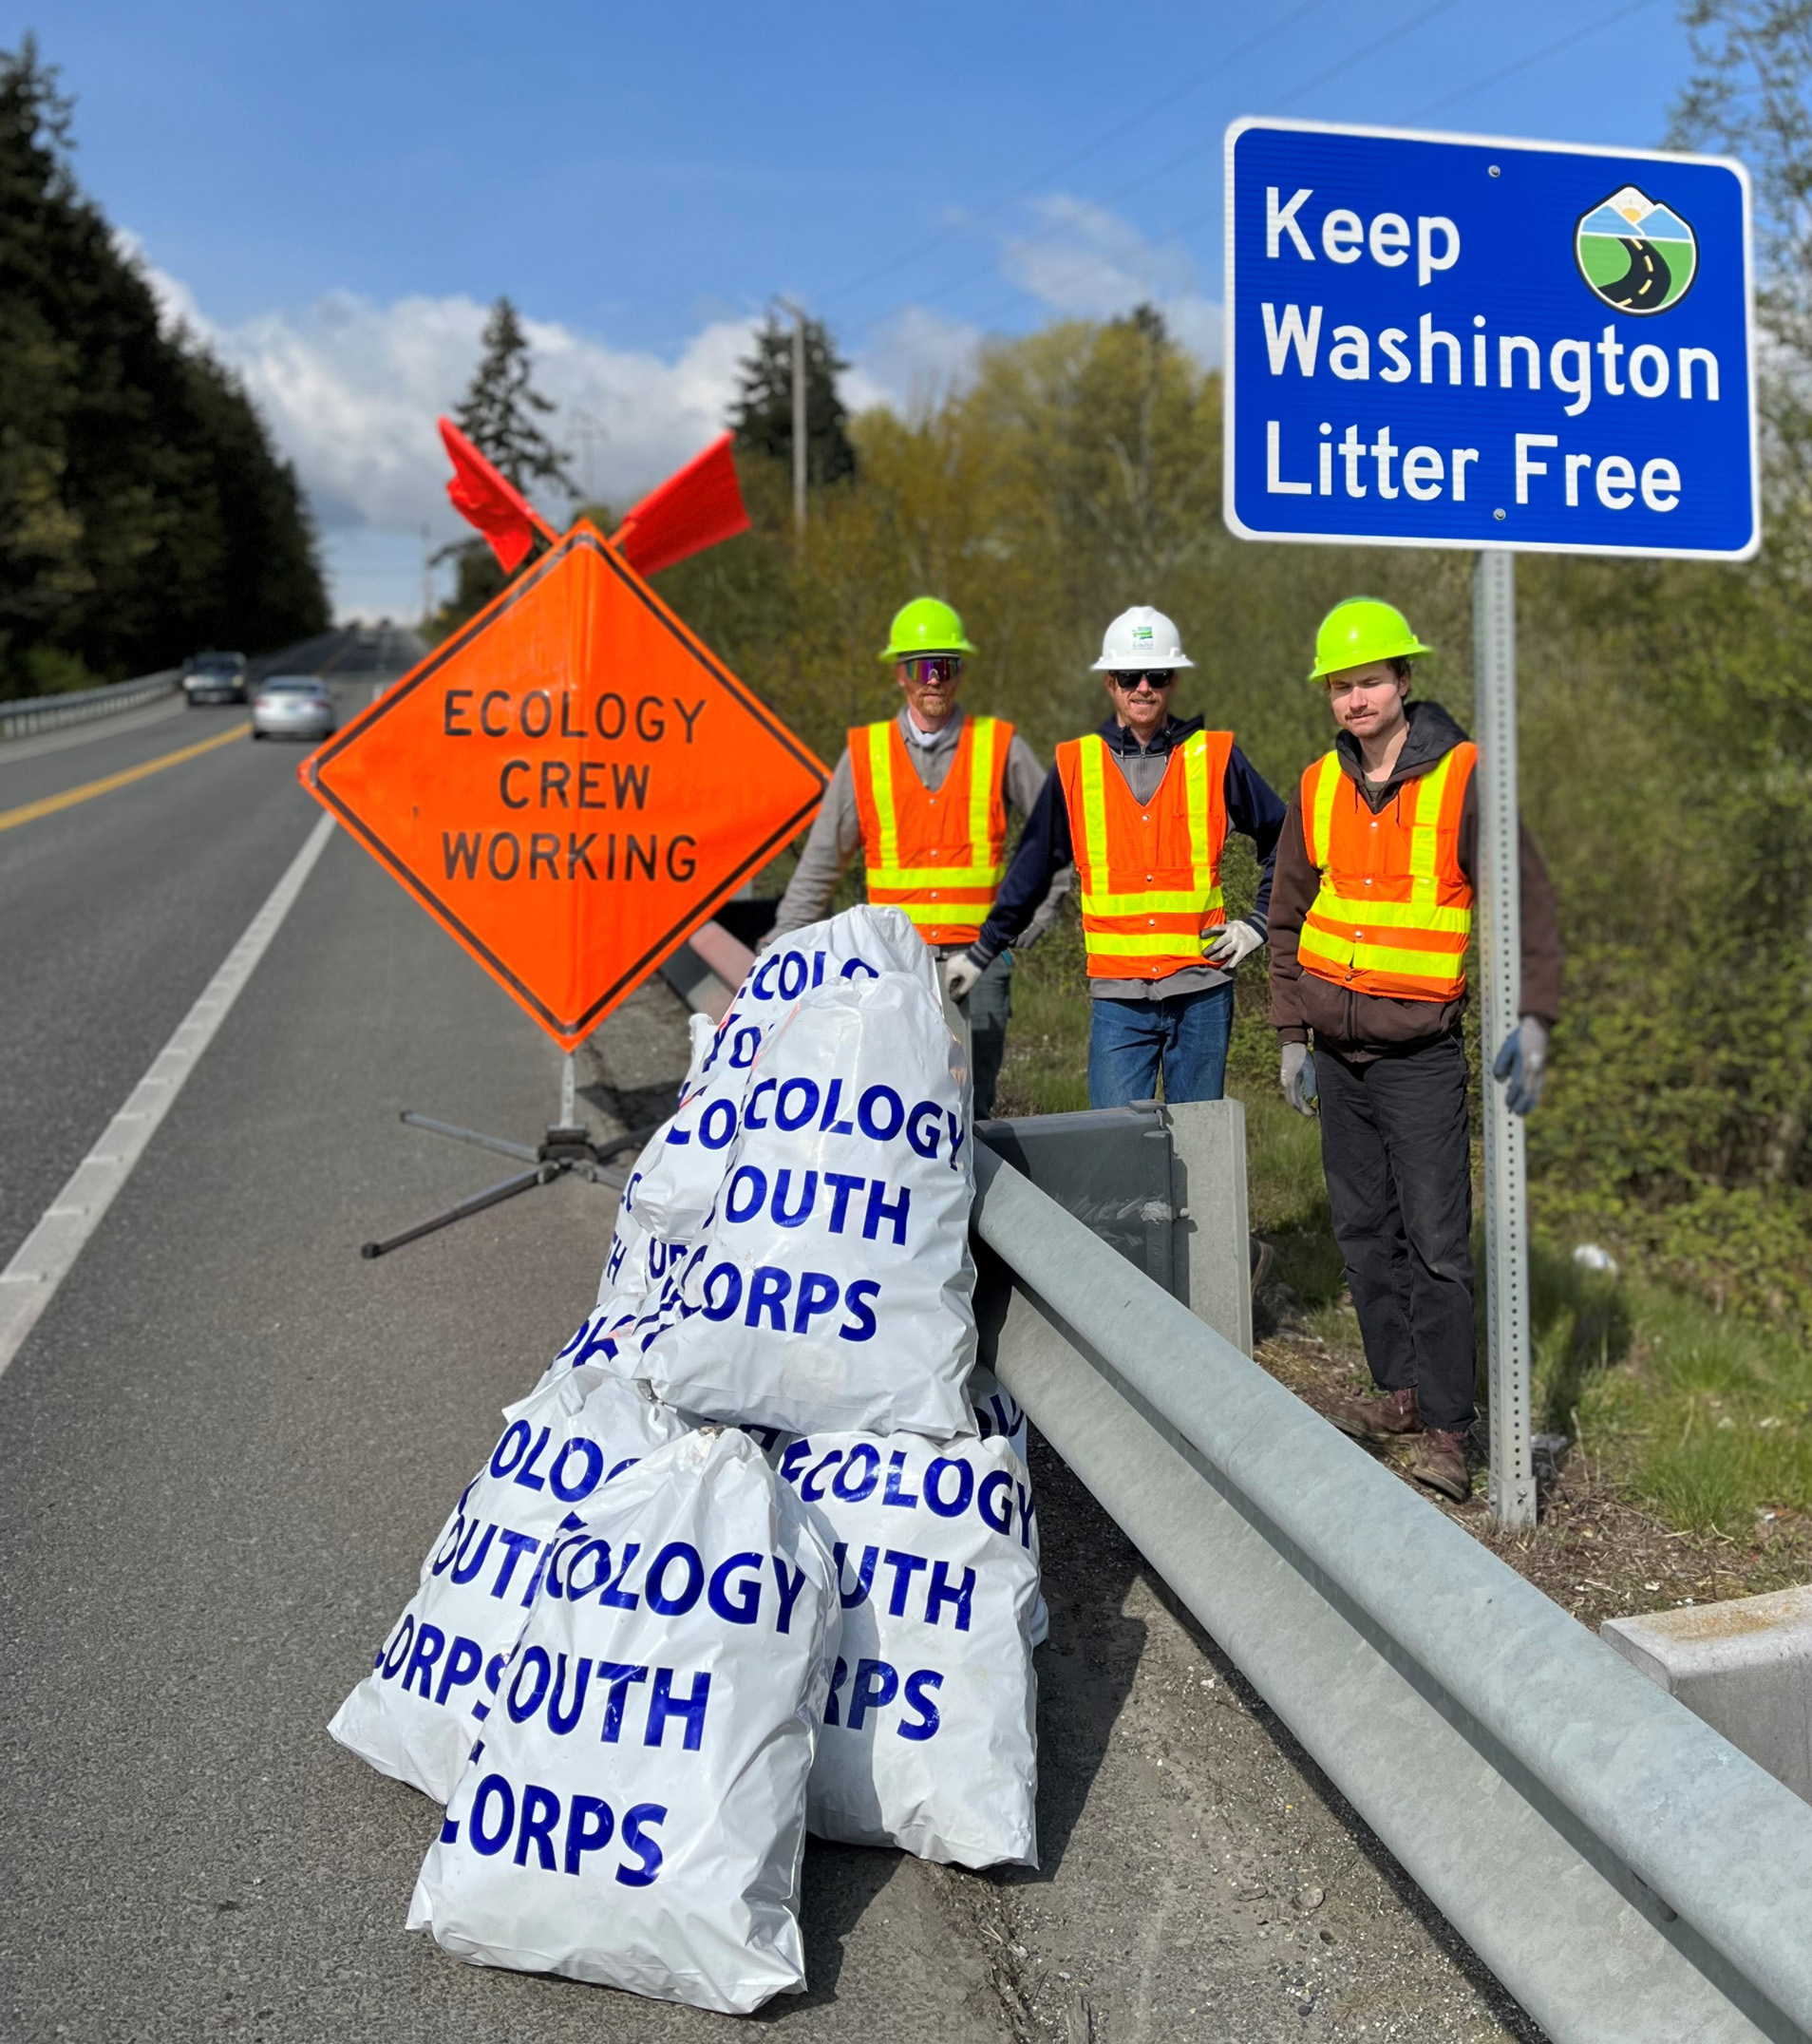 An Ecology Youth Corps litter crew works by a highway, alongside a pile of full litter bags and a new "Keep Washington Litter Free" sign.